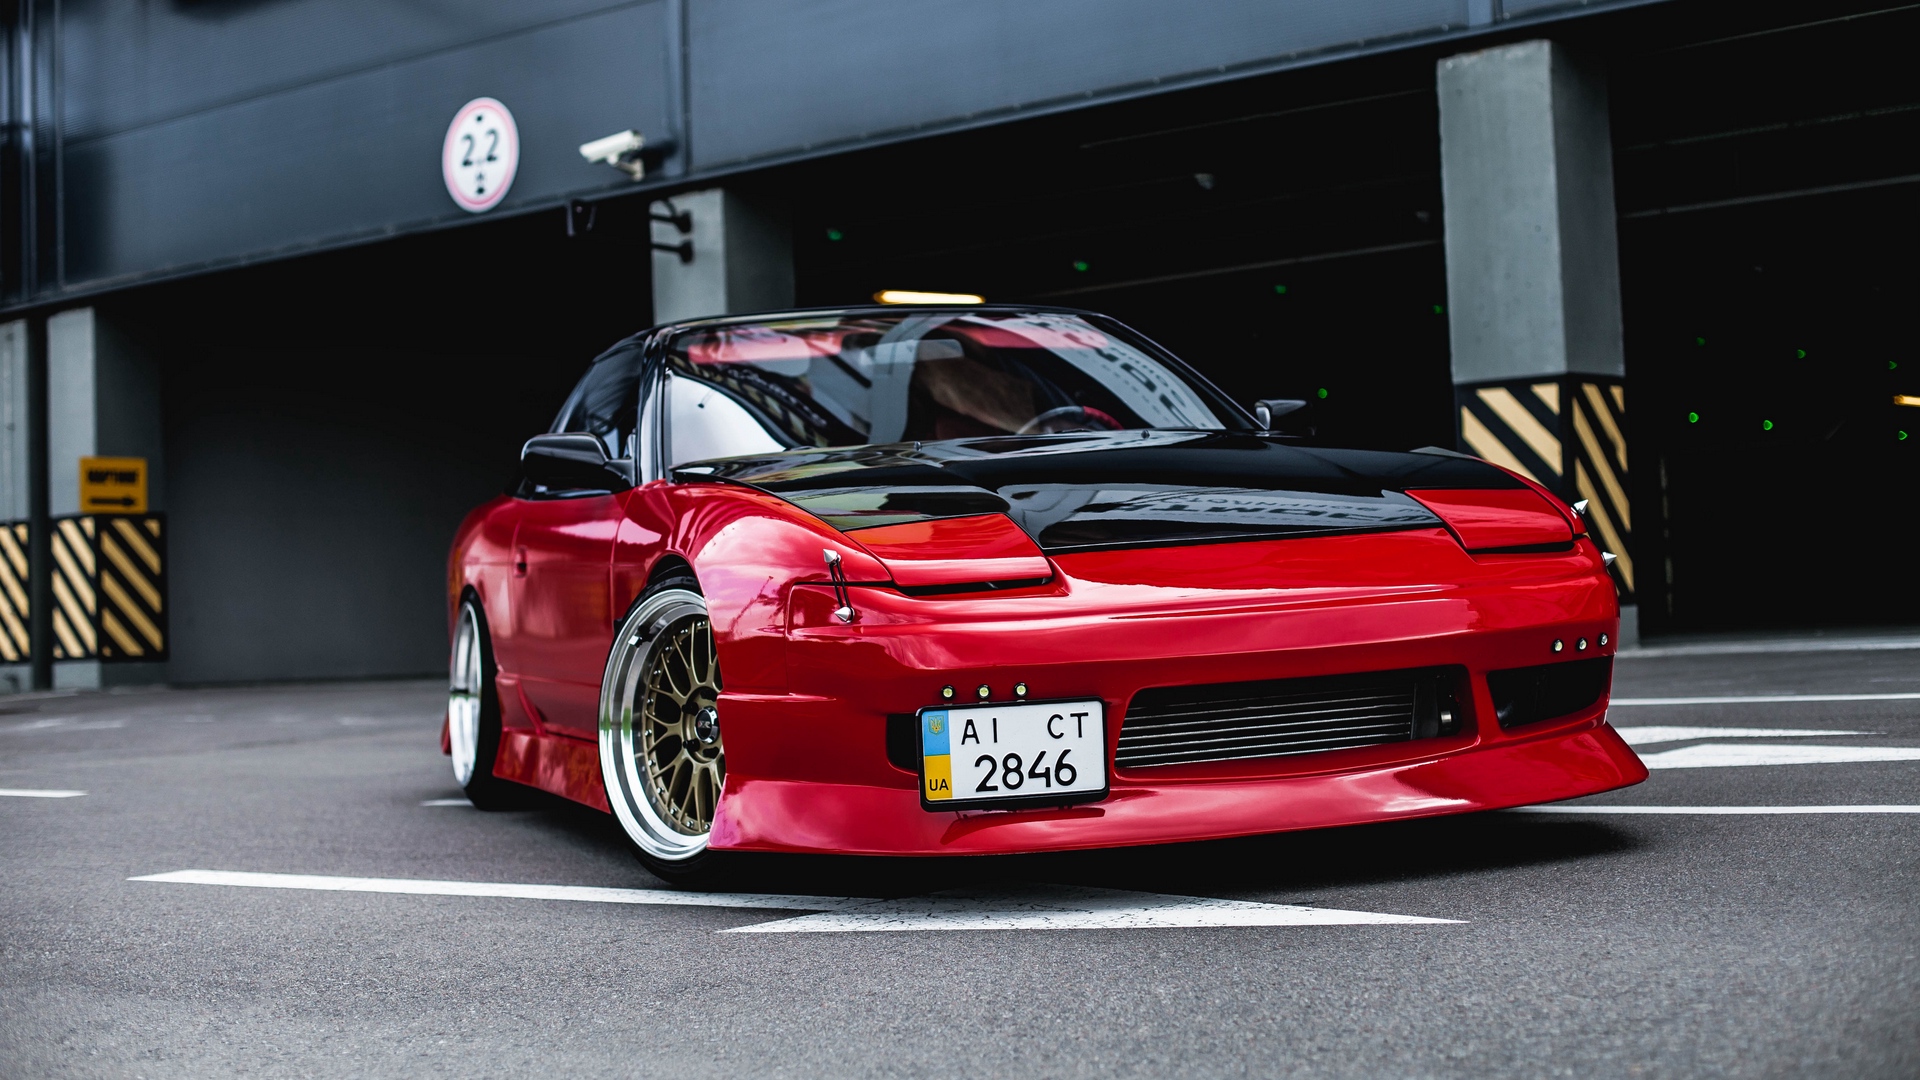 General 1920x1080 Nissan Nissan 200SX sports car tuning red cars pop-up headlights Japanese cars